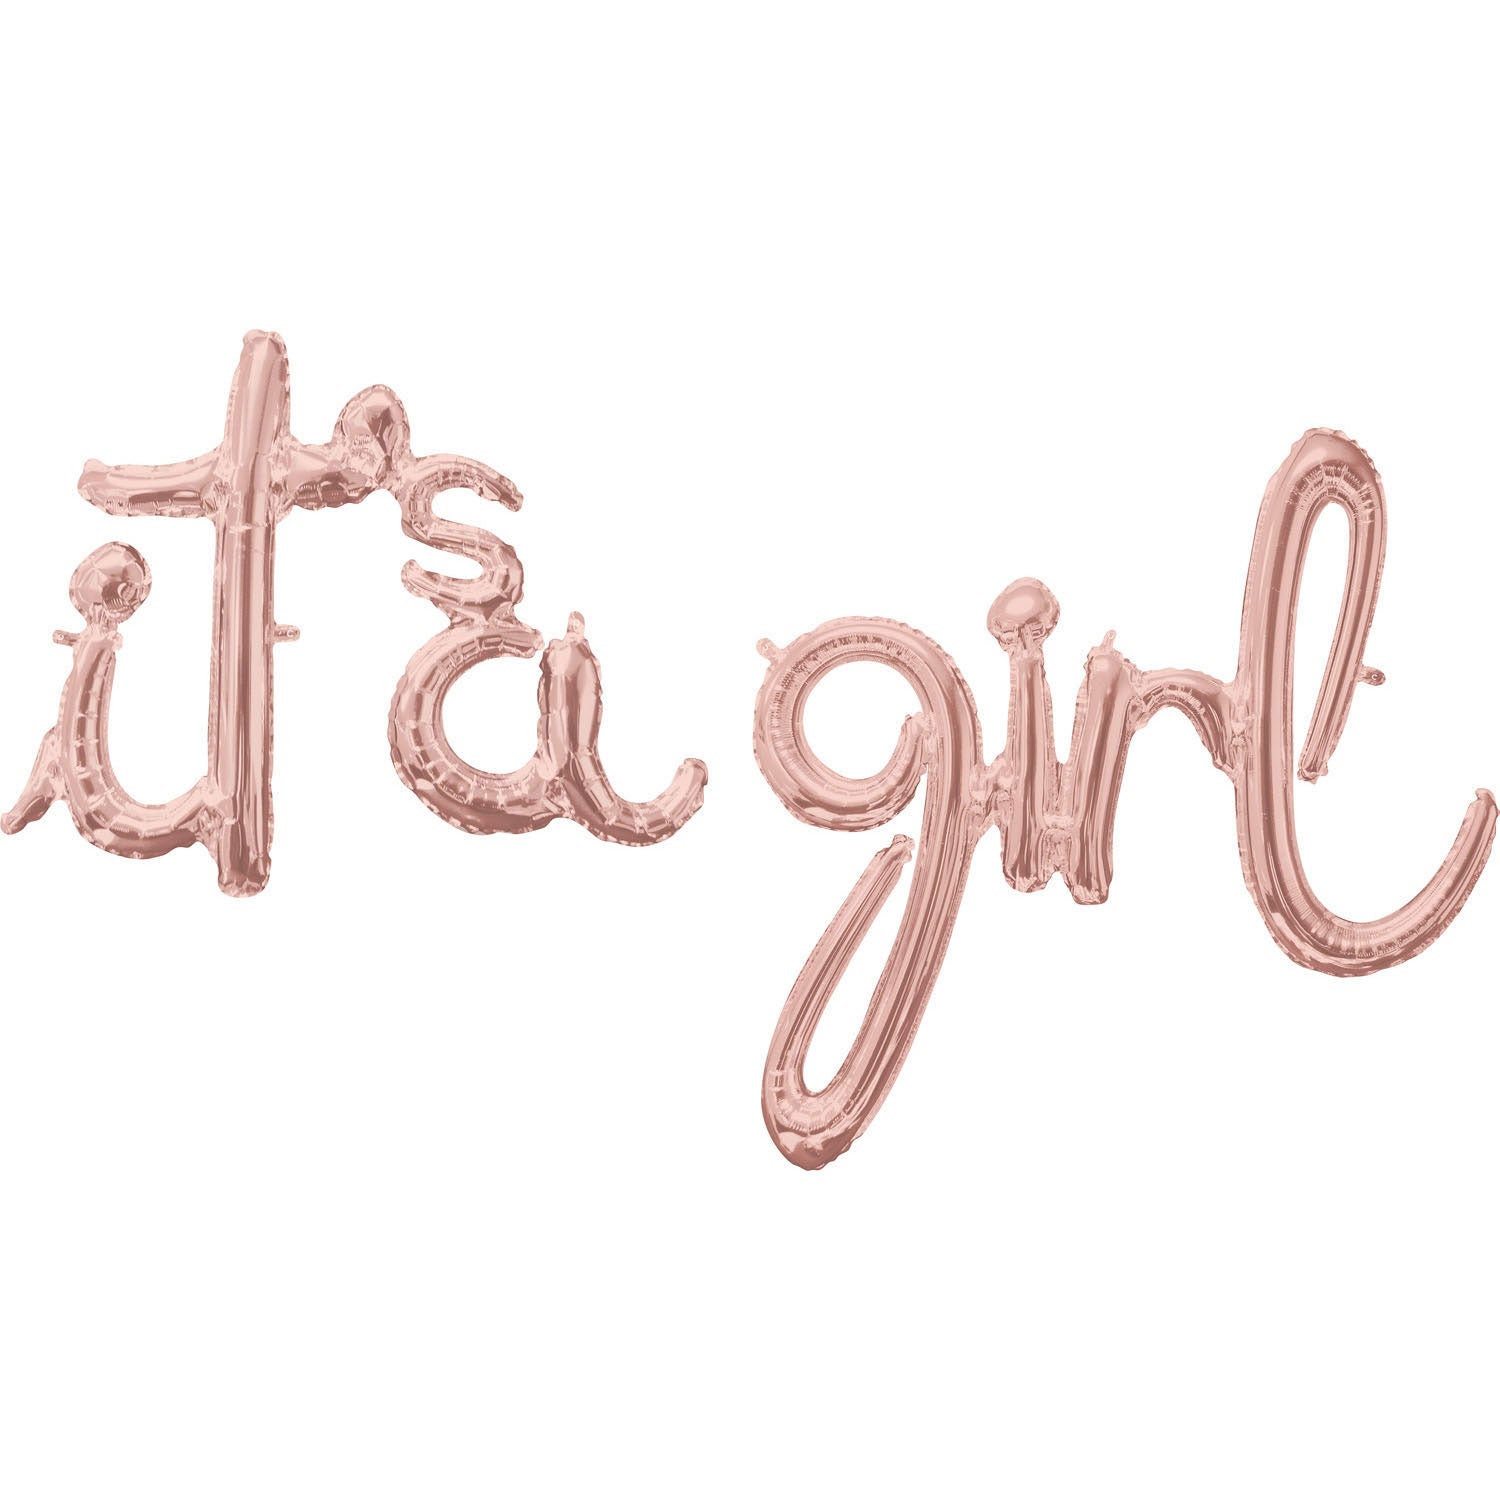 Copper-colored handwriting It's a girl inflated with air, swallowed